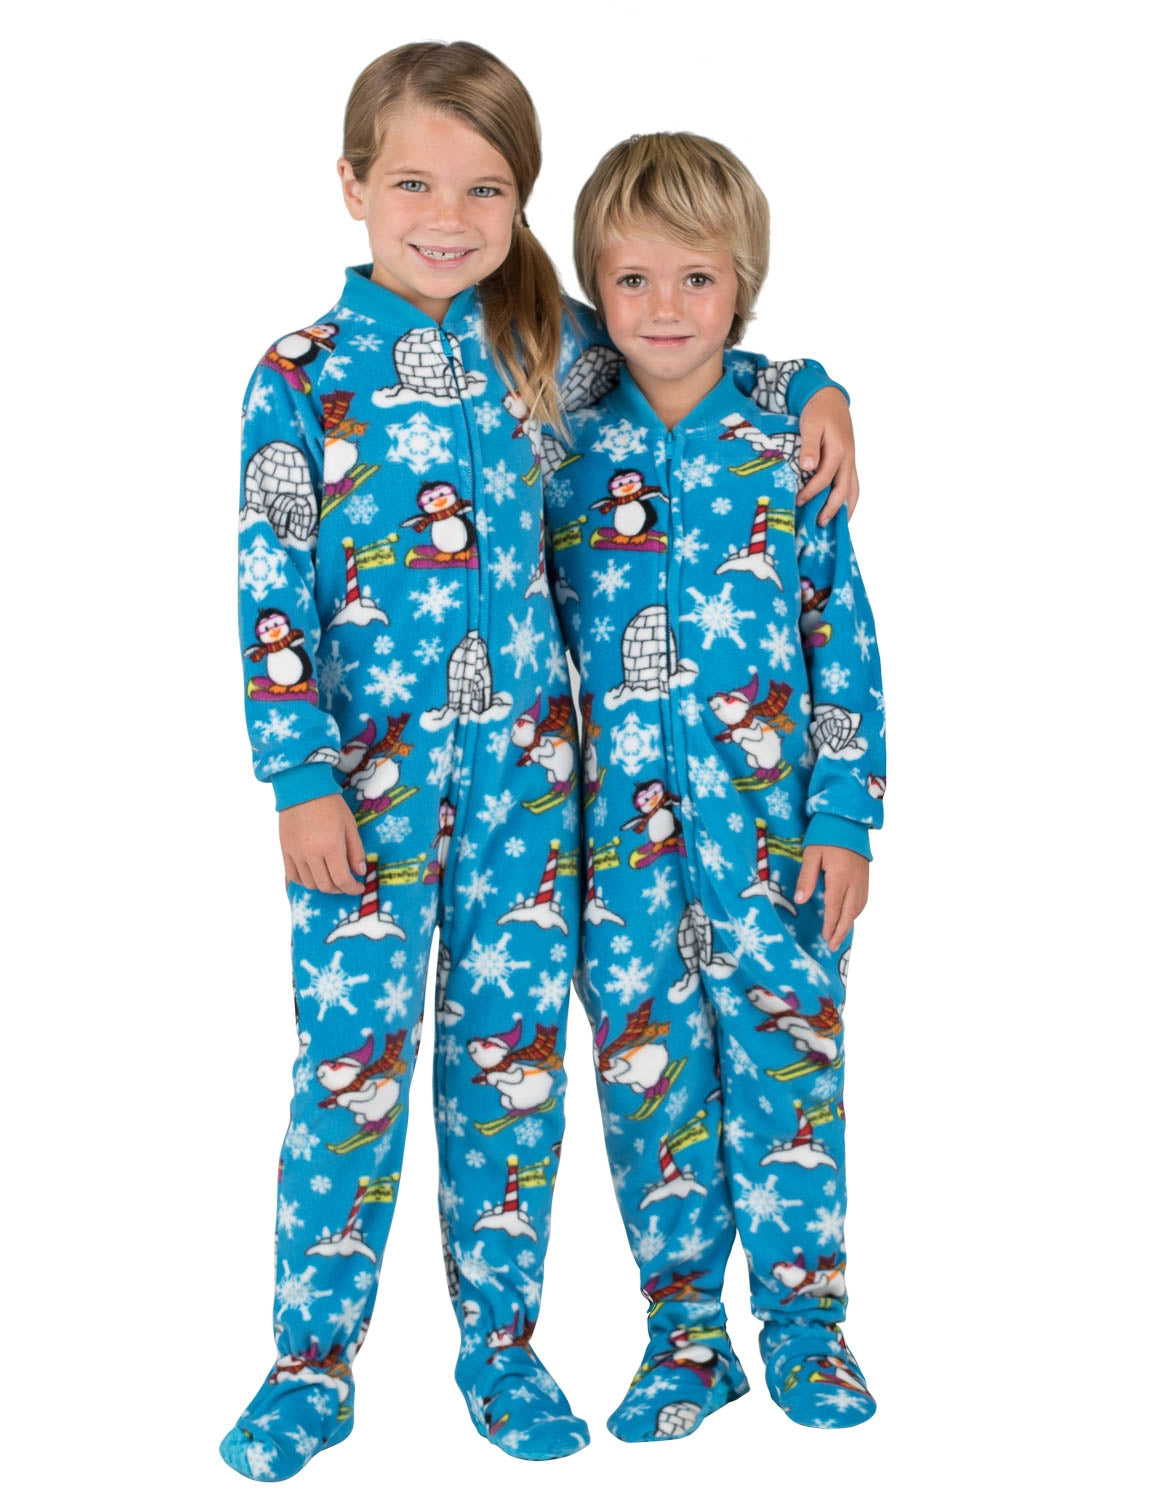 Kids Big Feet Pajamas Stay Cool Union Suit in Red